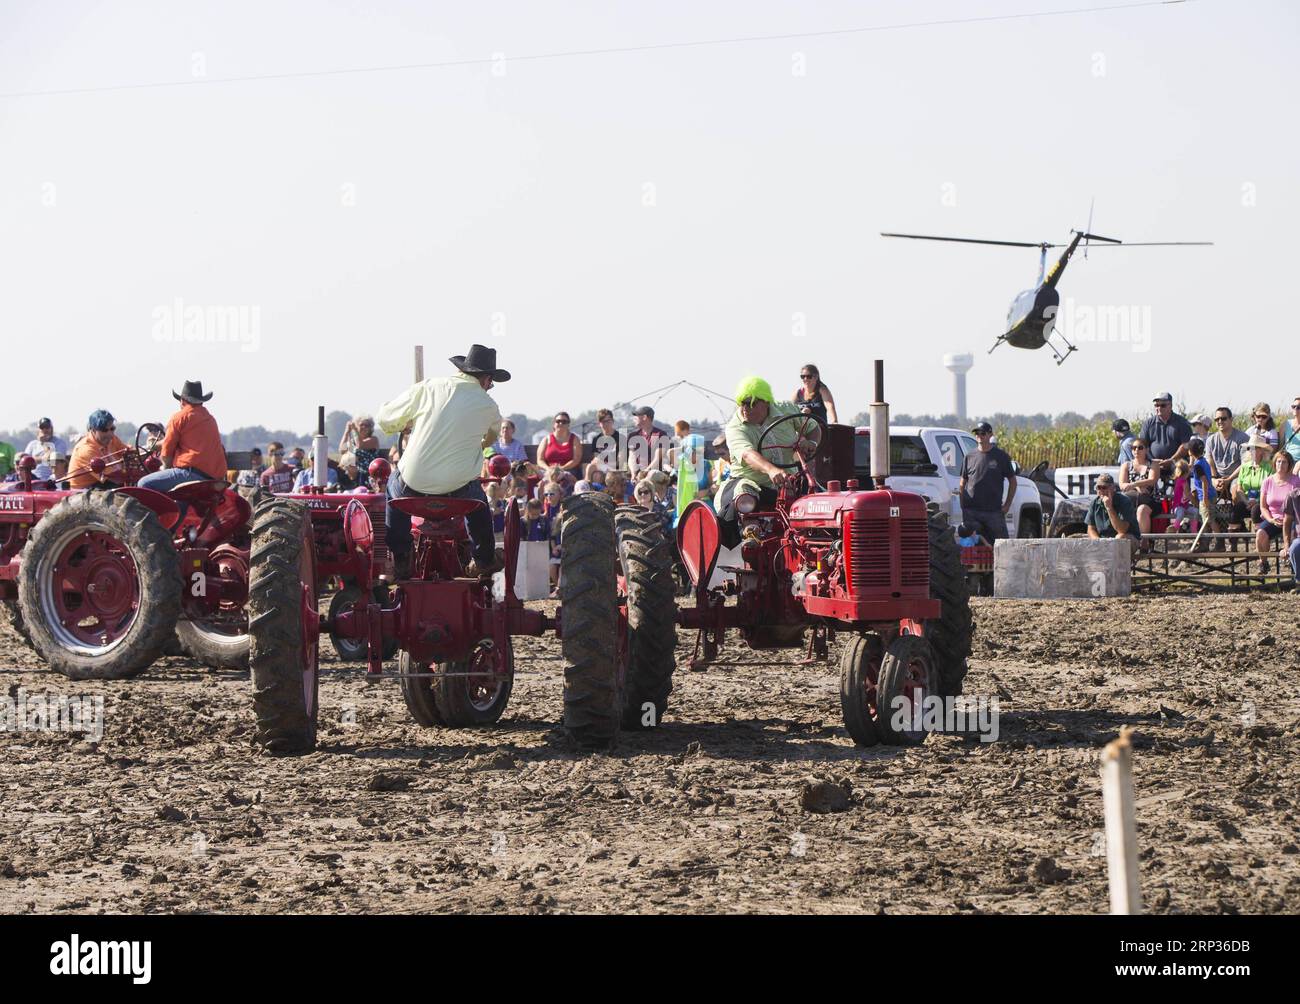 (180922) -- TORONTO, Sept. 22, 2018 -- Drivers perform with their tractors during the Dancing Tractors Show of the 2018 International Plowing Match and Rural Expo in Chatham-Kent, Ontario, Canada, Sept. 21, 2018. ) (jmmn) CANADA-ONTARIO-CHATHAM KENT-IPM-DANCING TRACTORS ZouxZheng PUBLICATIONxNOTxINxCHN Stock Photo